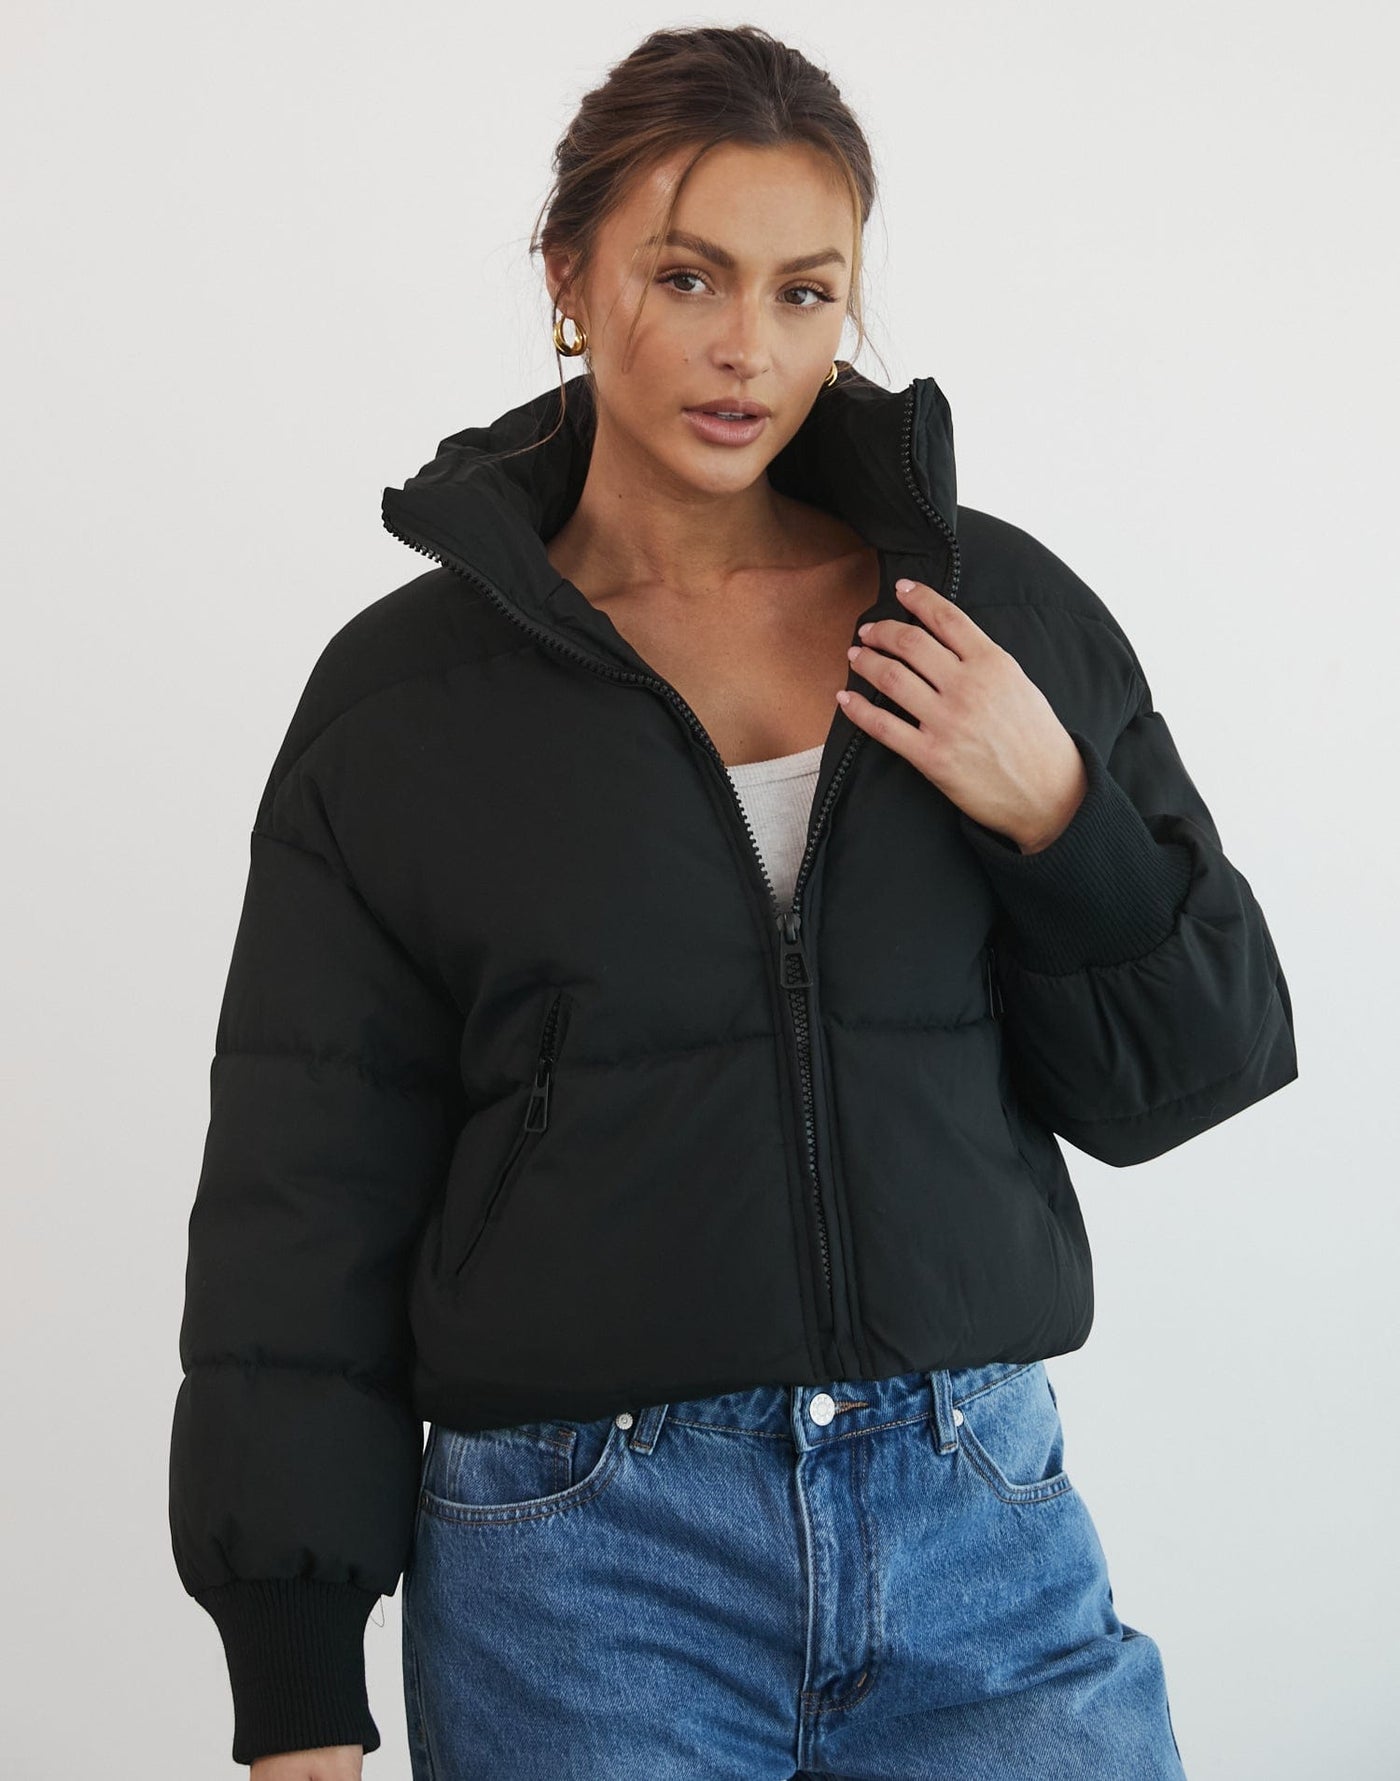  - Women's Outerwear - Charcoal Clothing